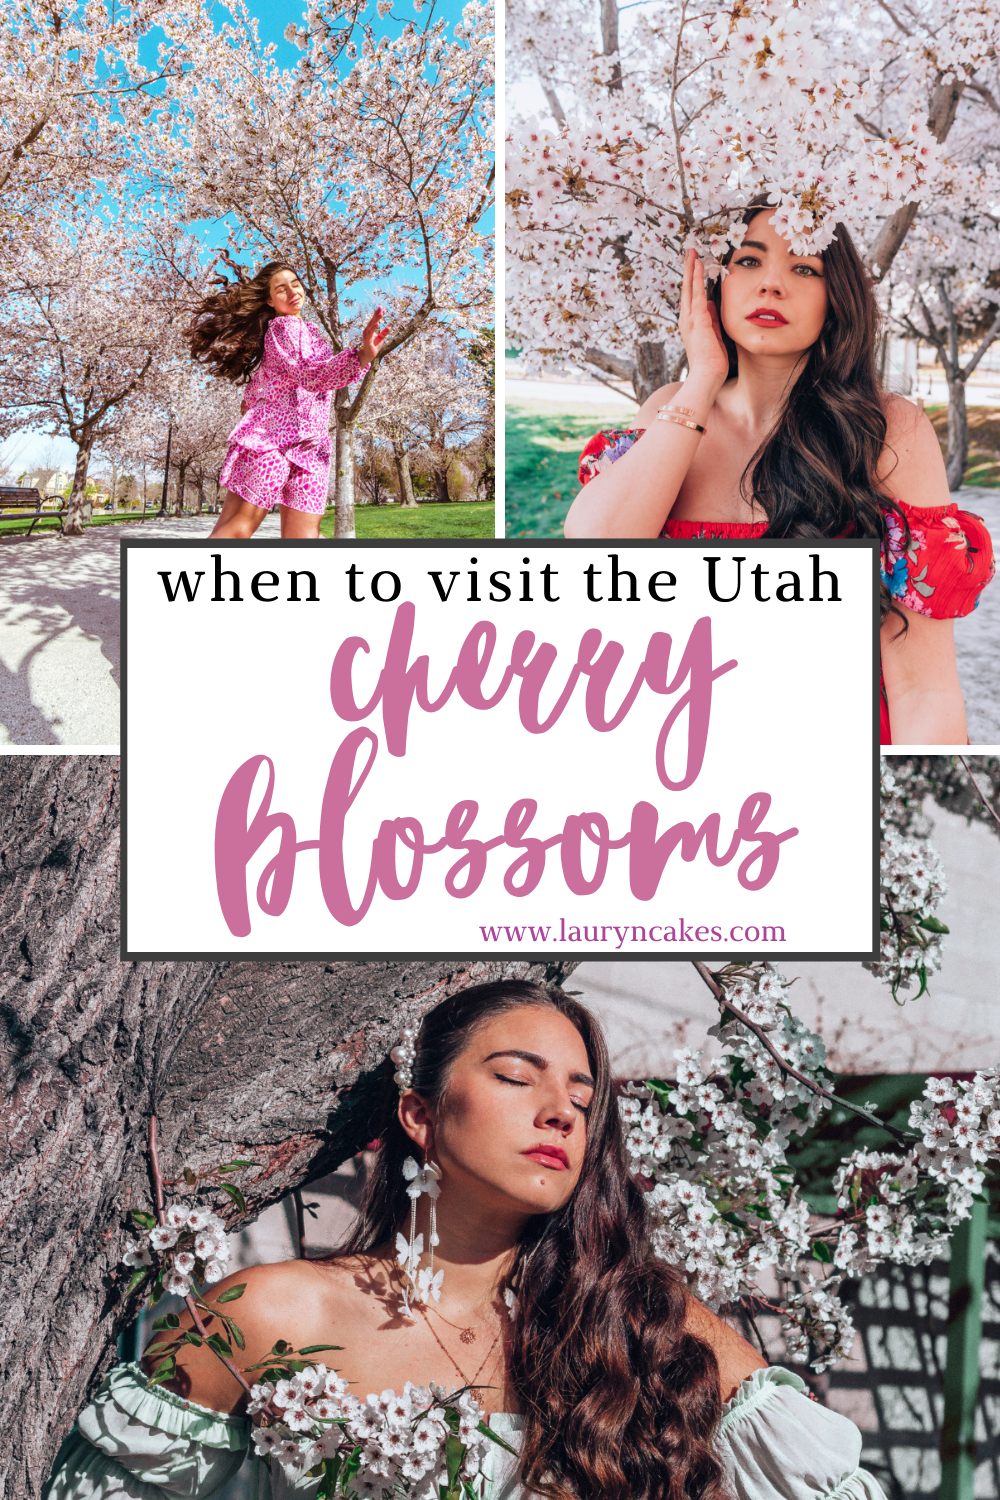 collage images of a woman, Lauryncakes near a blooming floral trees. Image has words that say, "ultimate guide to Salt Lake City, Utah Cherry Blossom Trees"